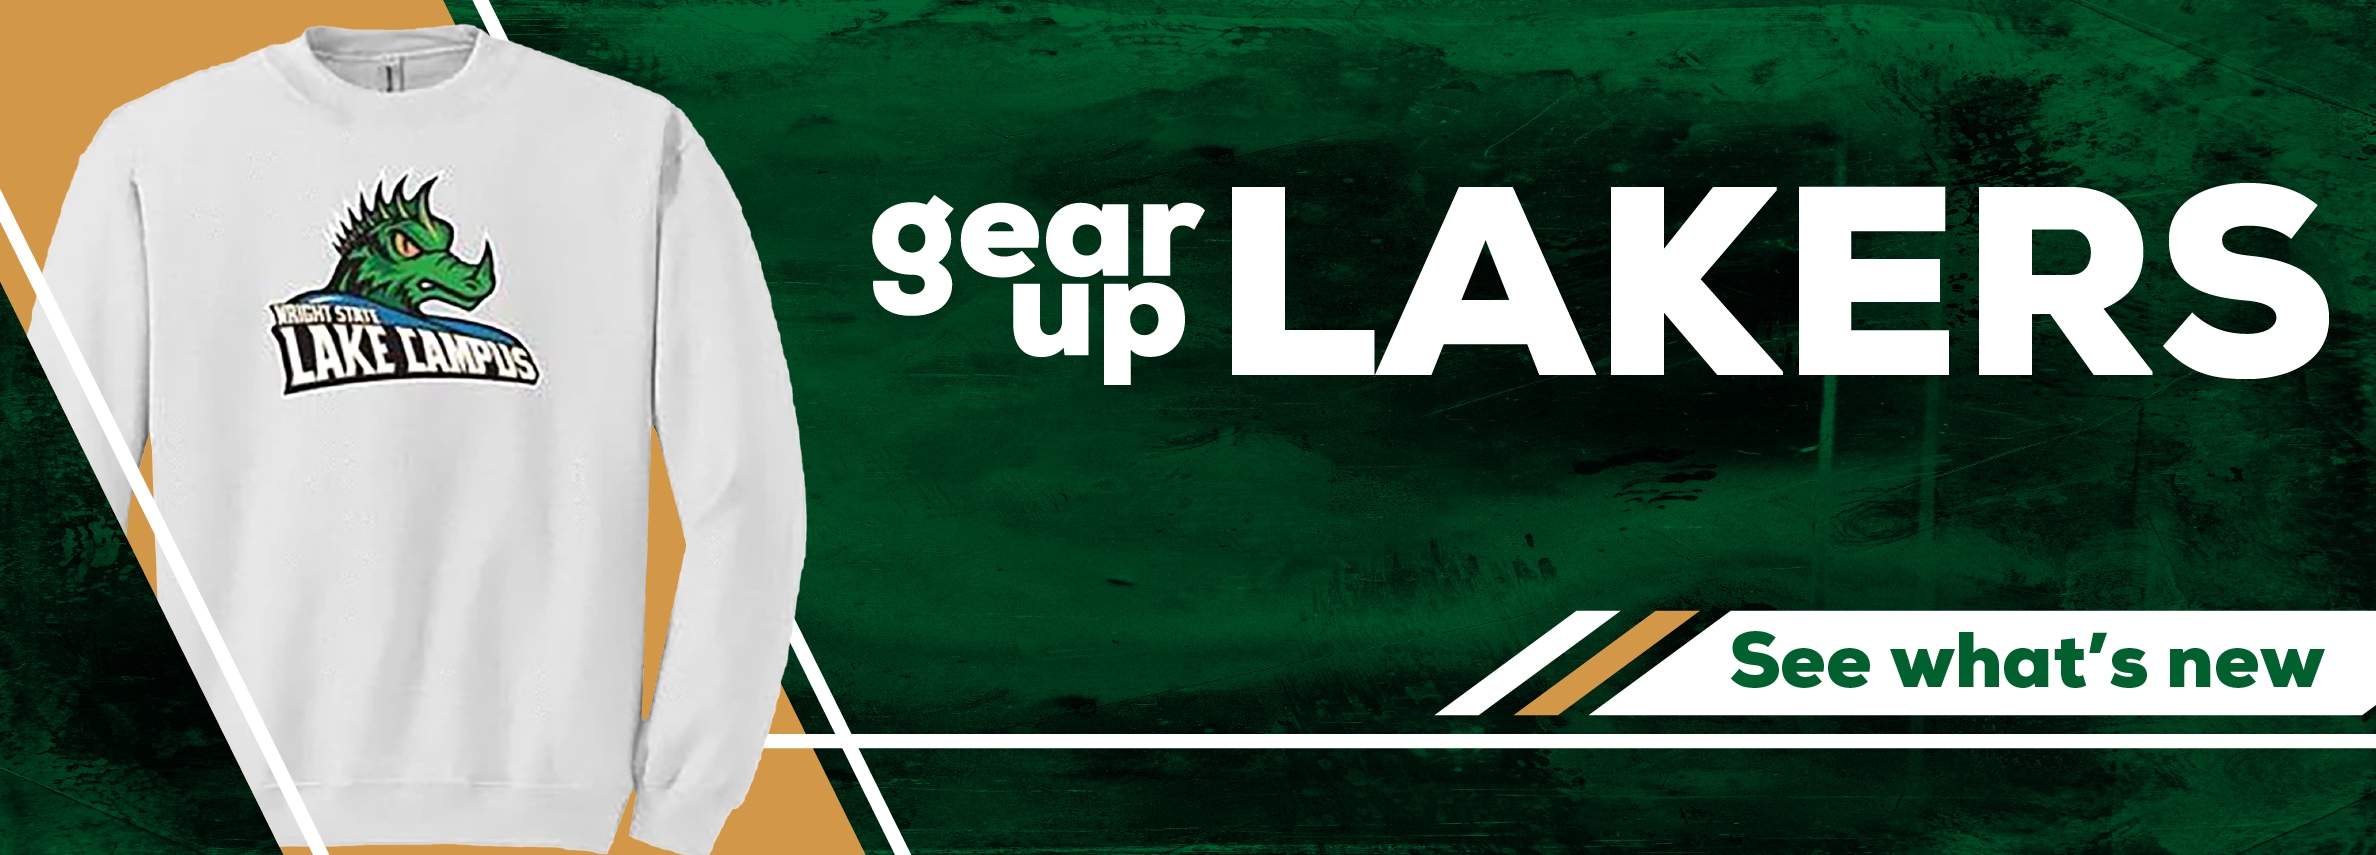 Gear Up Lakers. See what's new.